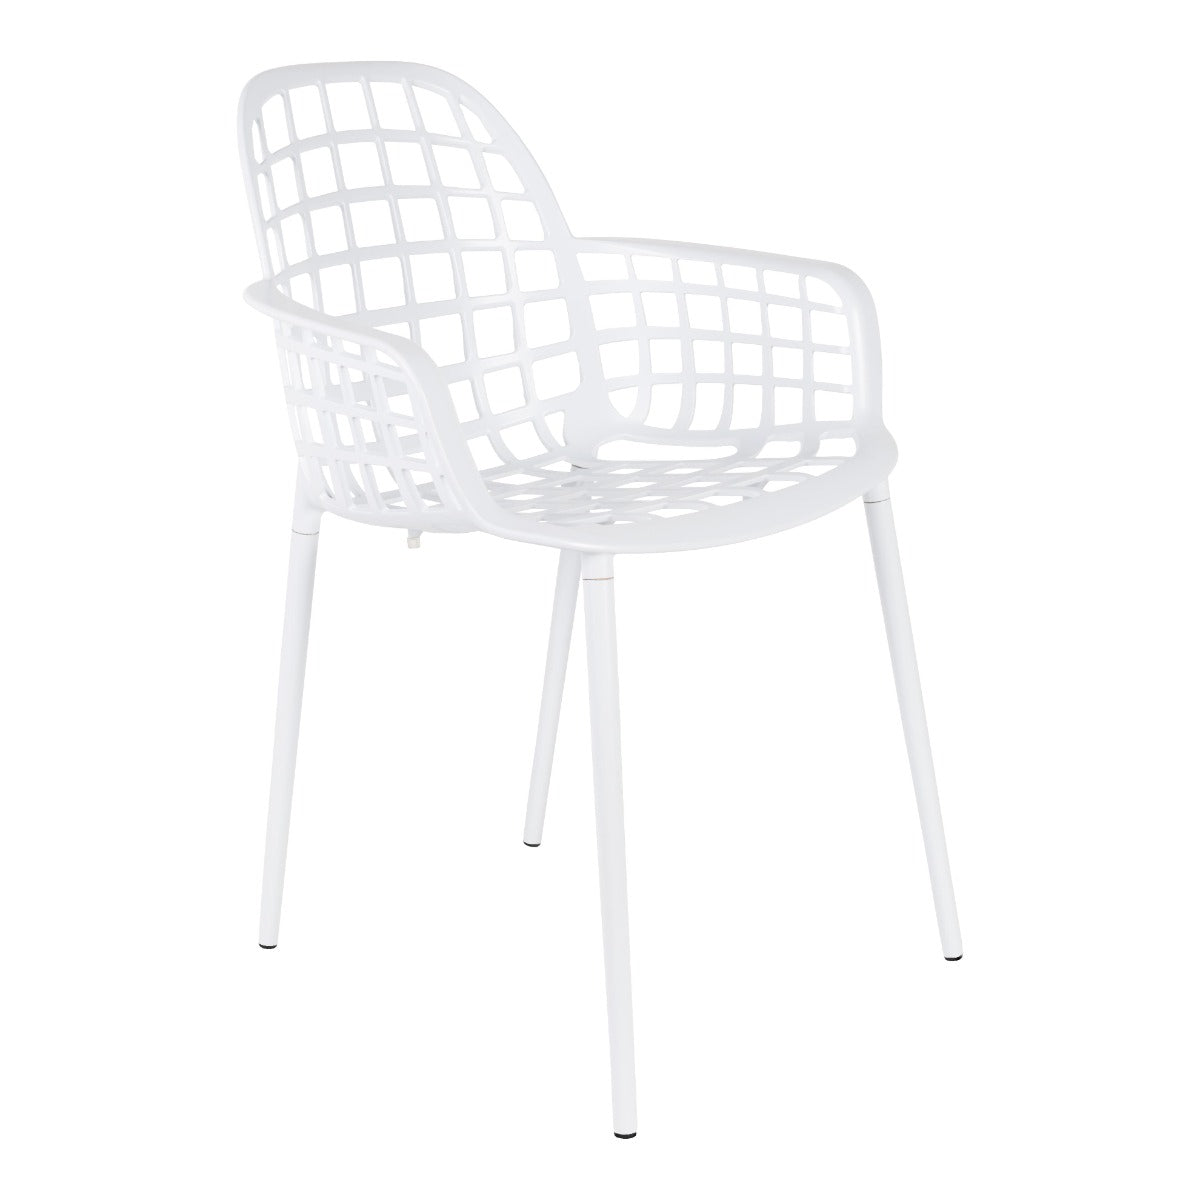 The Albert Kuip chair is an amazing combination that will be great for both a modern terrace and a boho dining room. Yes, this piece of furniture can stand both indoors and outside. The seat, although it looks very light, was made of thick aluminum, which means that it weighs more, but is also more resistant to weather conditions such as rain or snow.